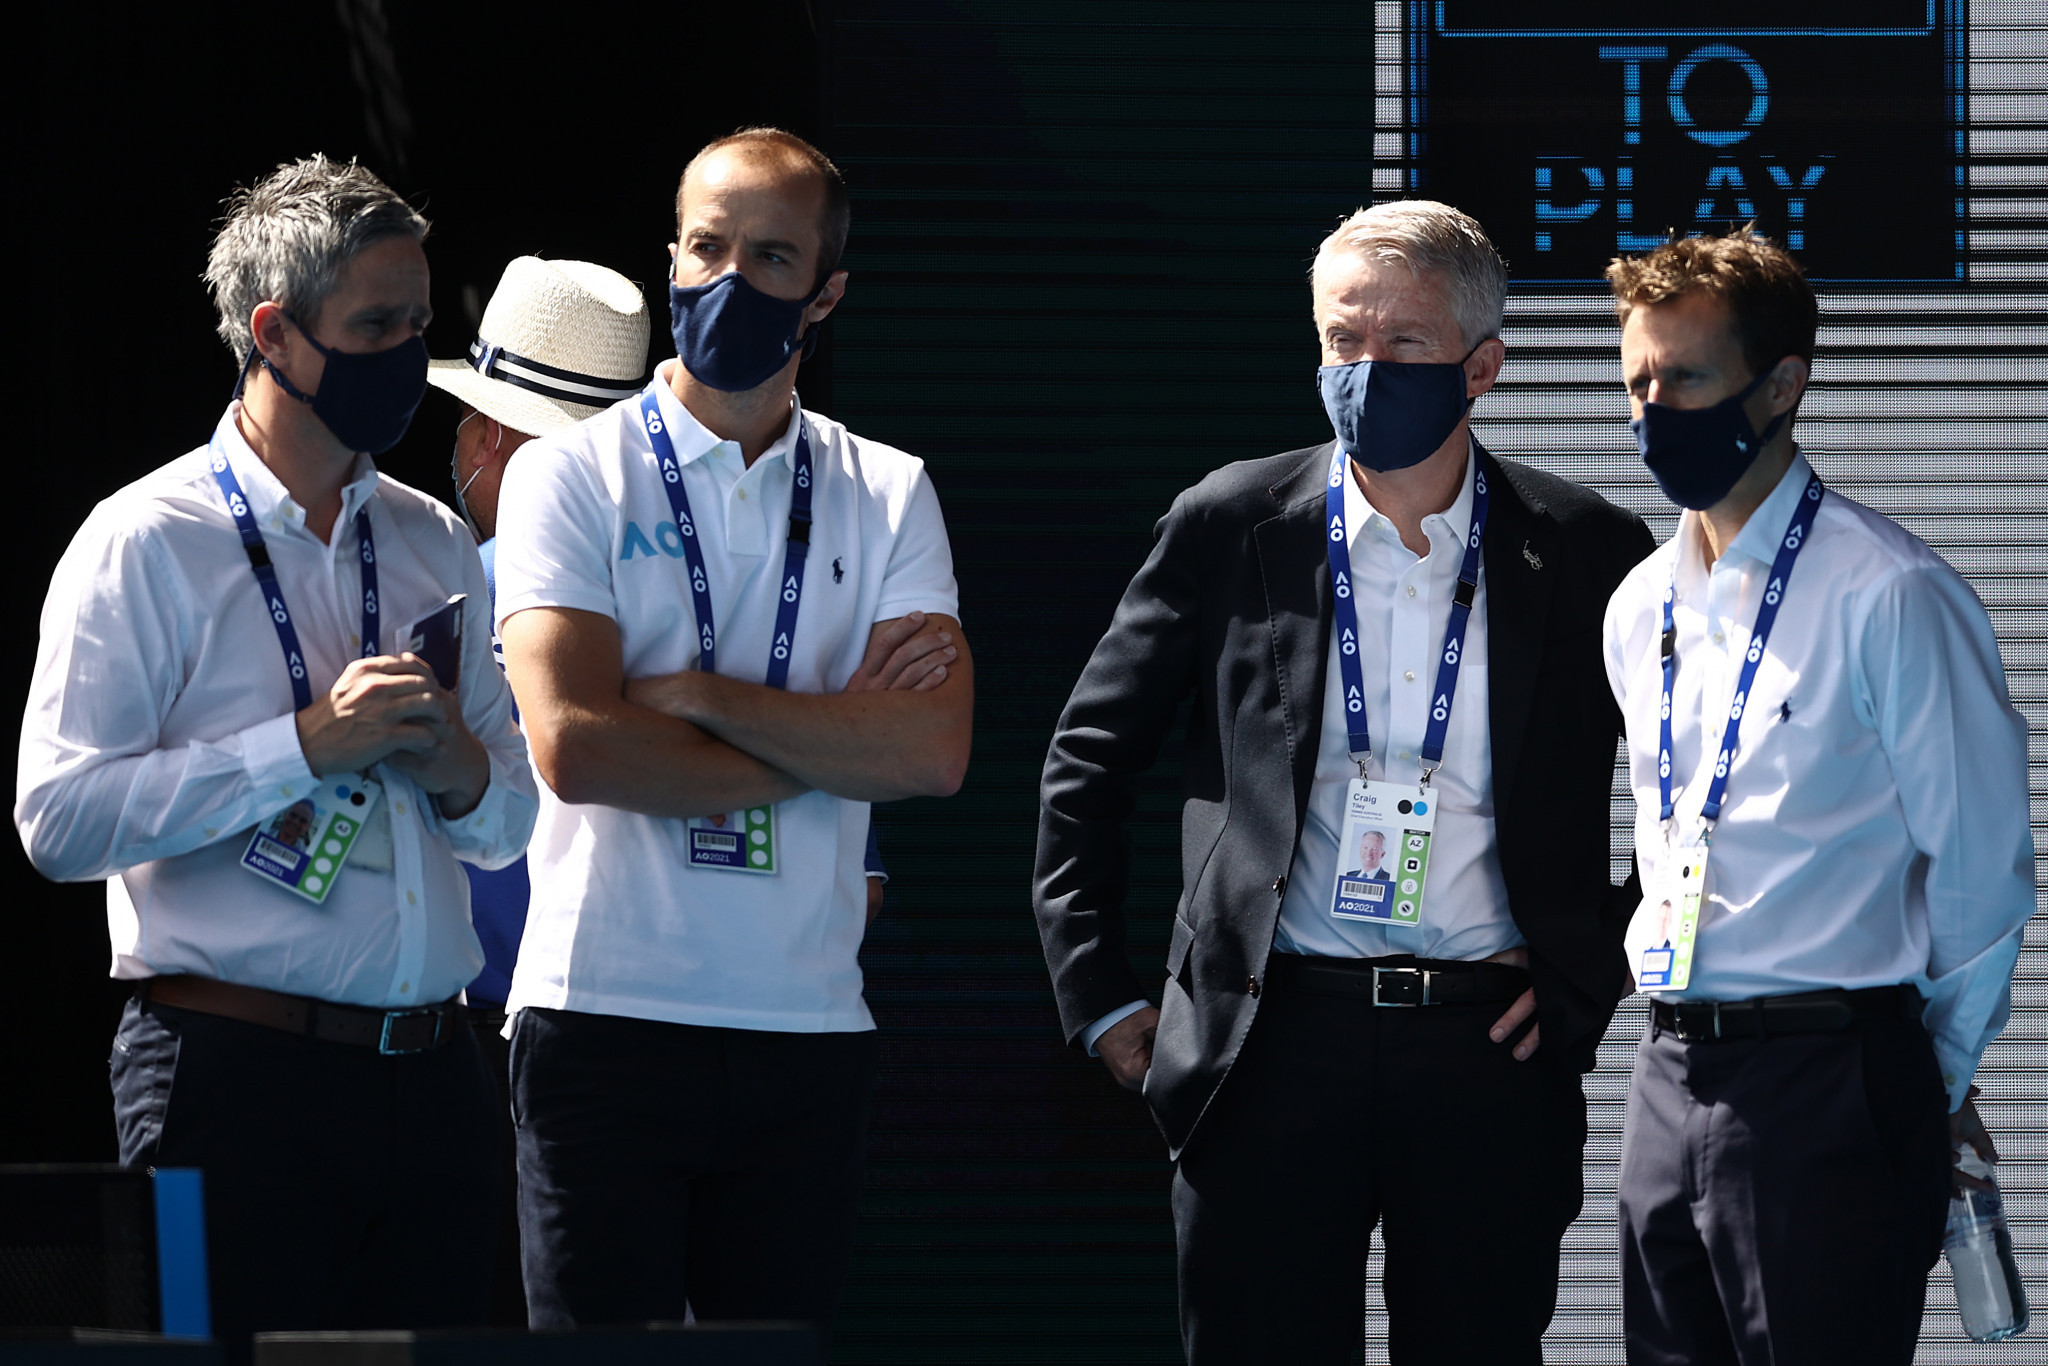 Tennis Australia chief executive Craig Tiley, second right, said he struggled to sleep during preparations for the Australian Open ©Getty Images